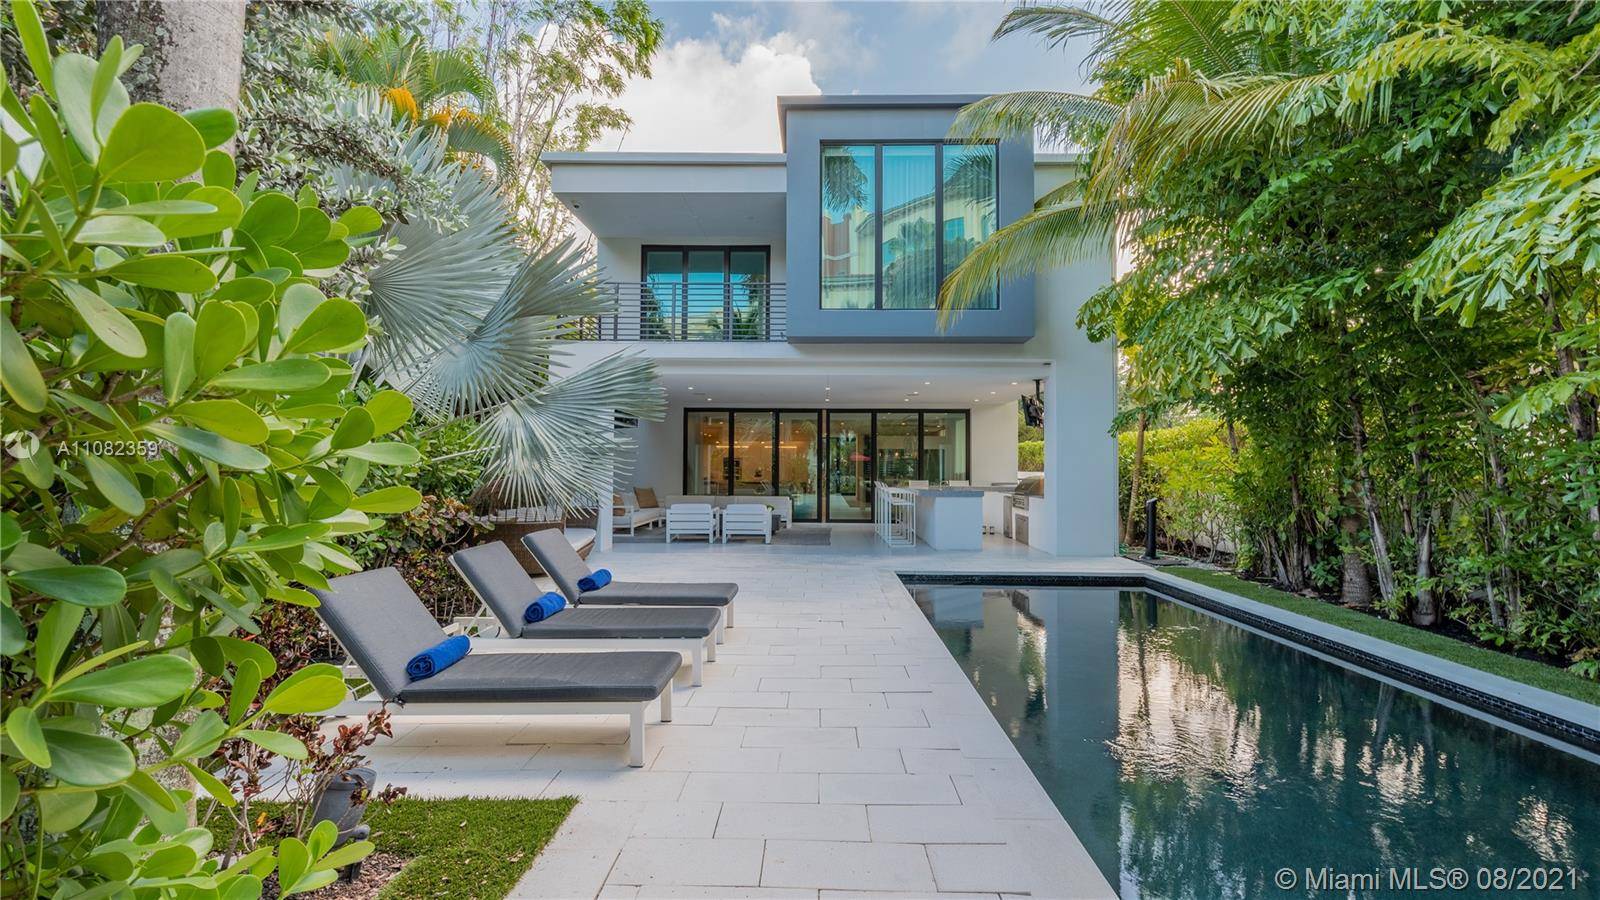 ULTRA MODERN WATERFRONT VILLA WITH THE FINEST RESTAURANTS AND SHOPS AT YOUR DOORSTEP.